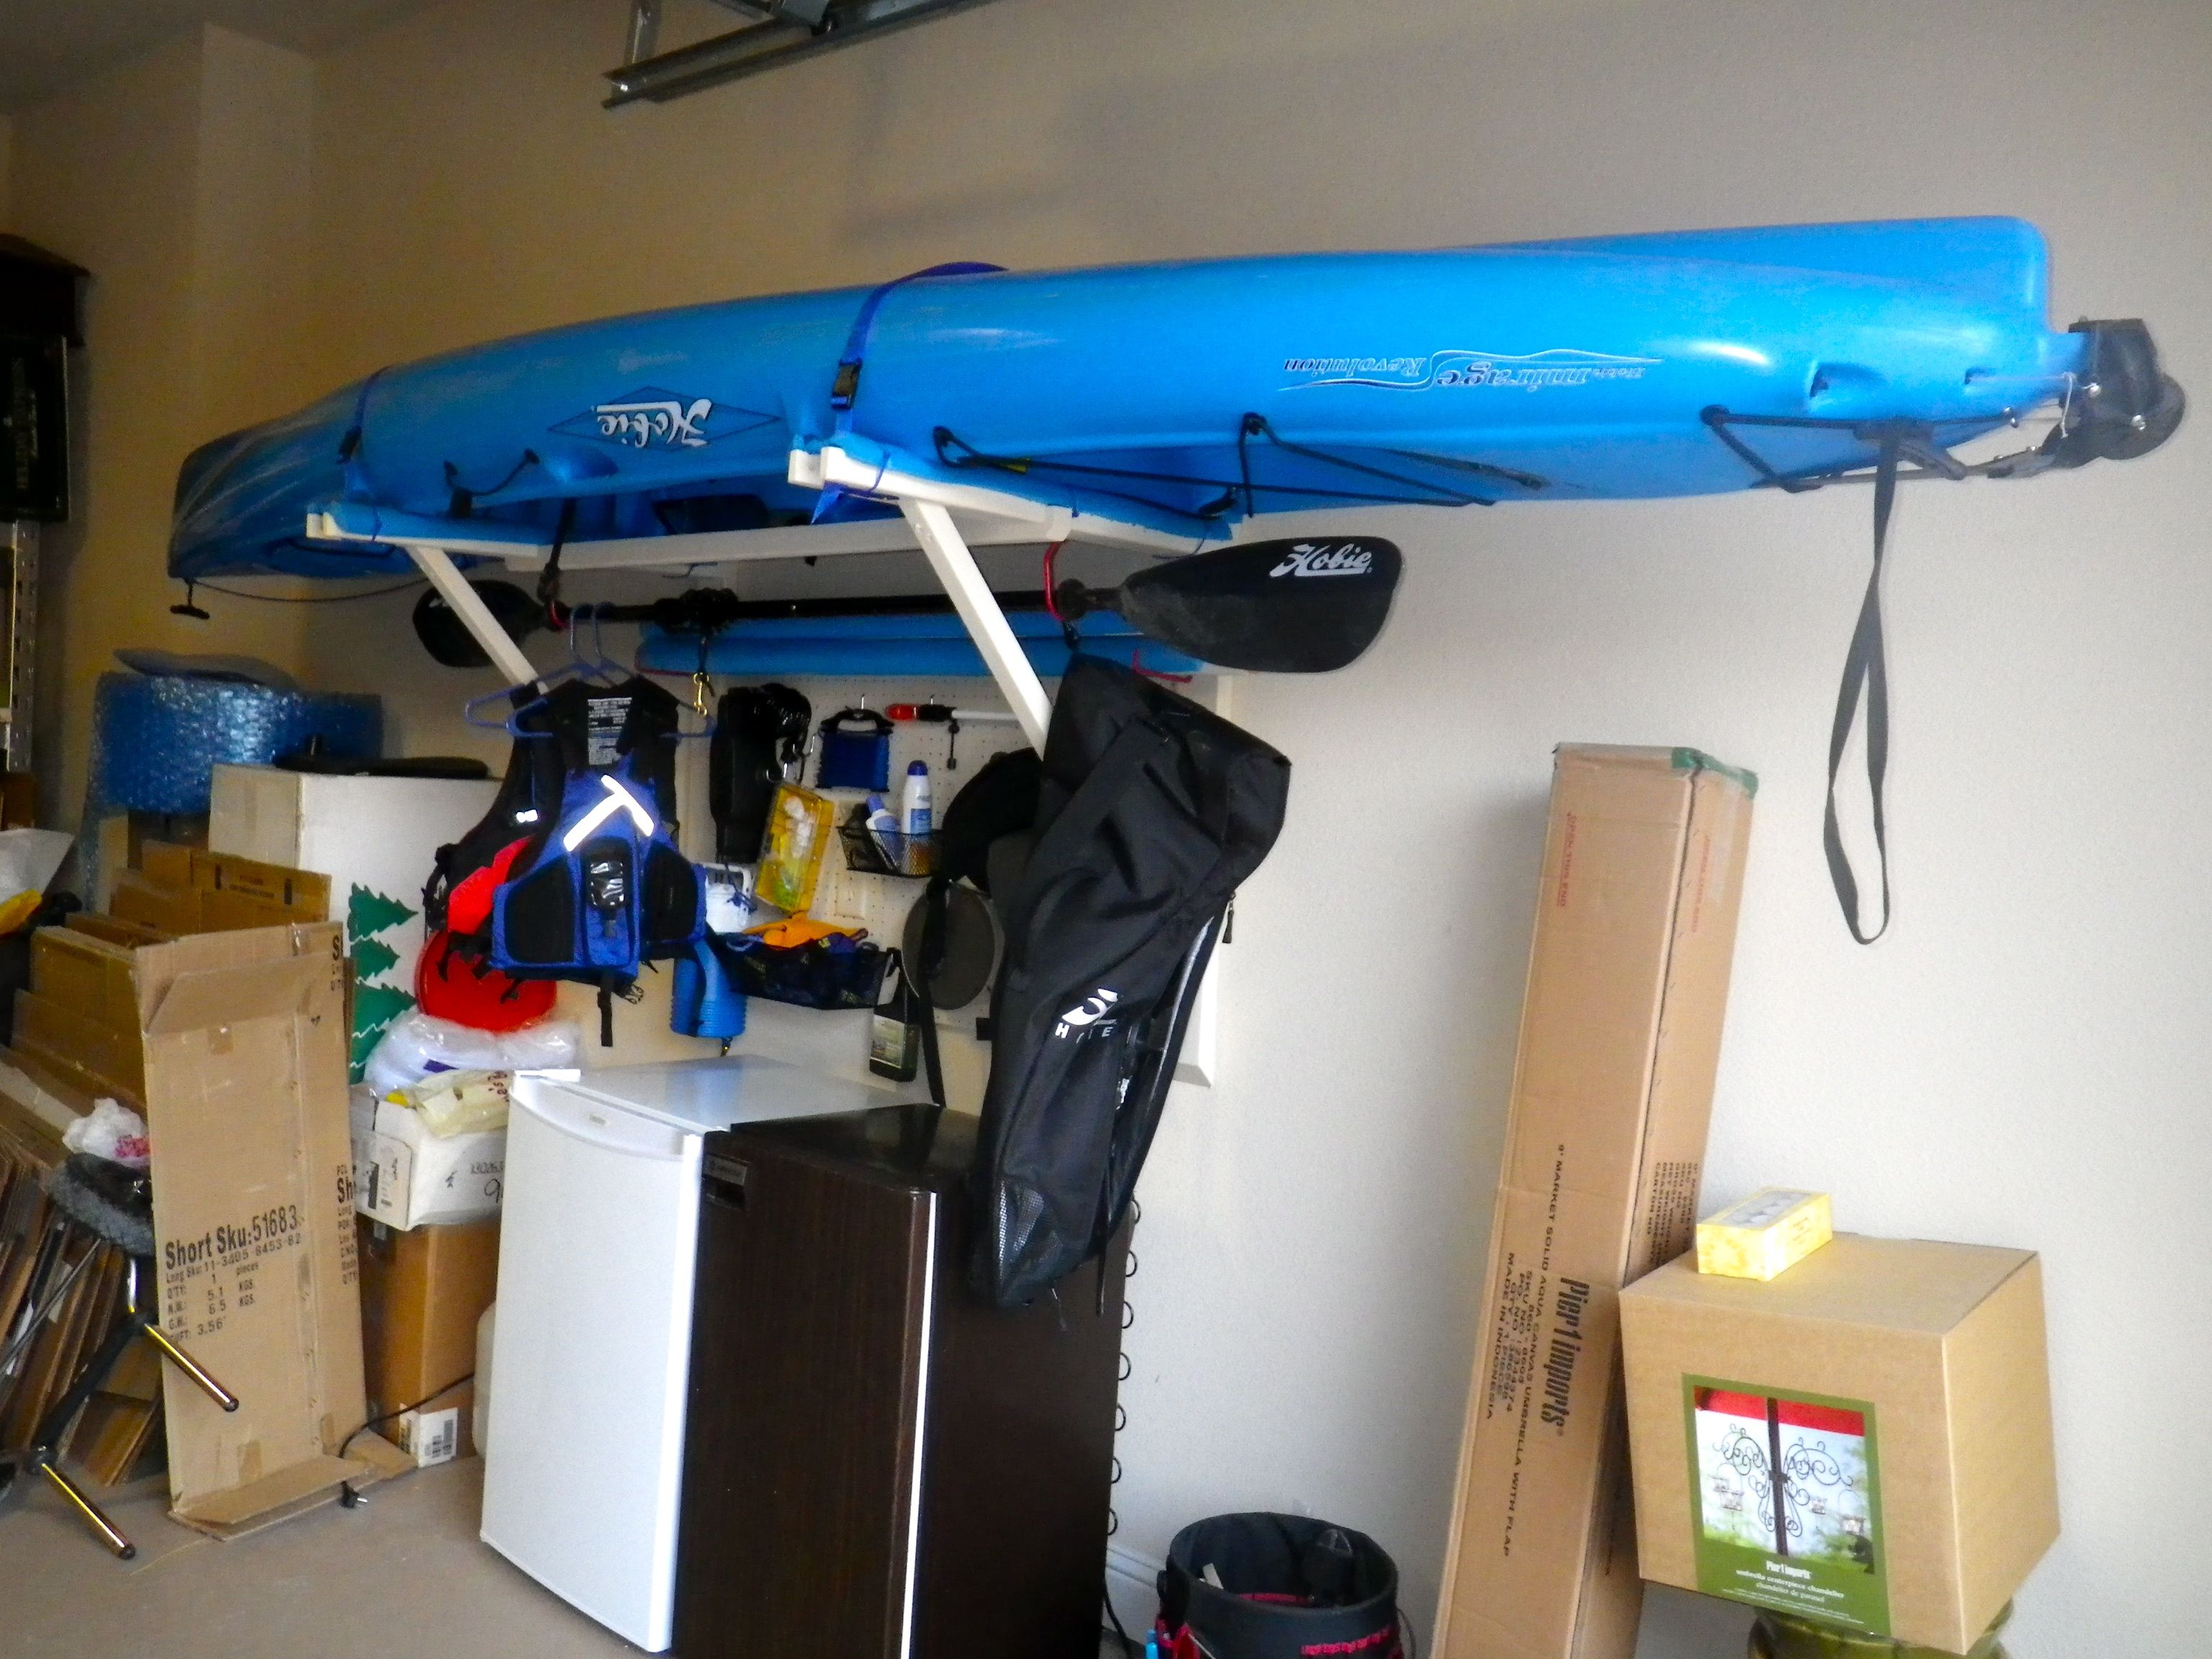  topic - Storage help -- Hobie Outback just below the garage joists